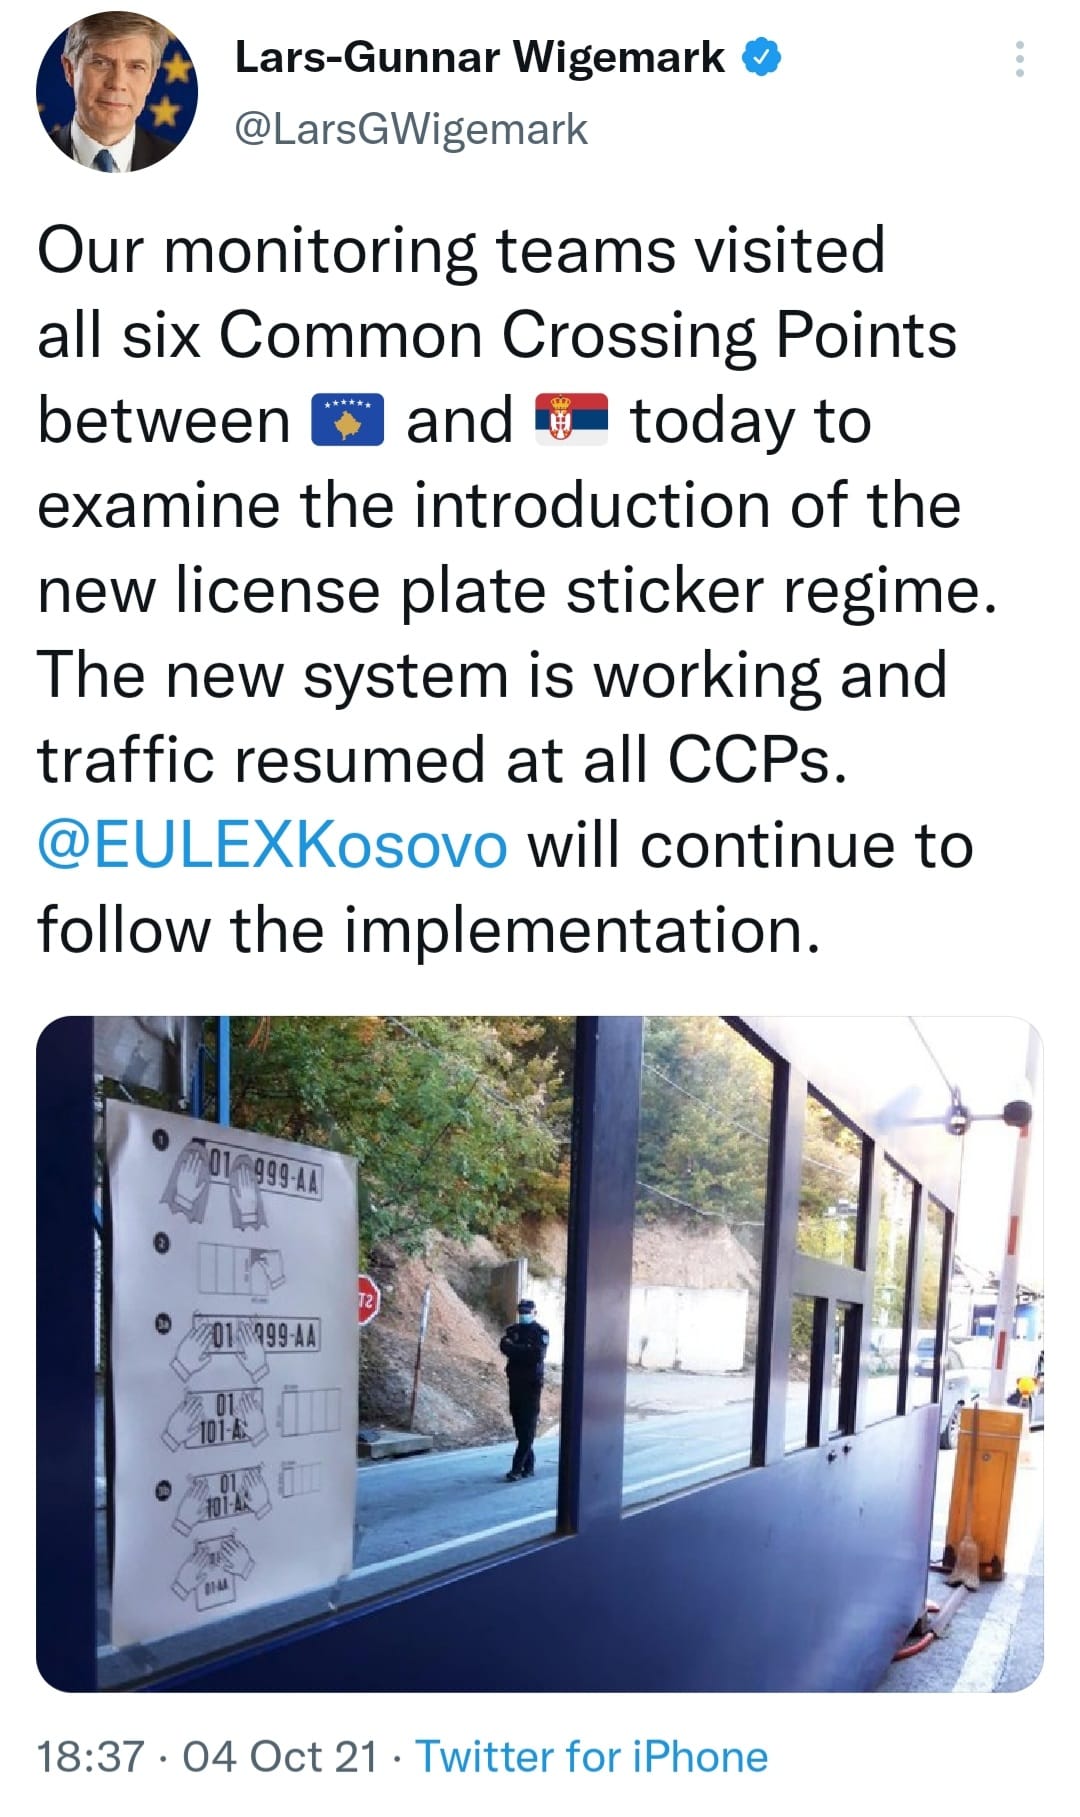 Tweet on EULEX's monitoring of the implementation of the sticker regime